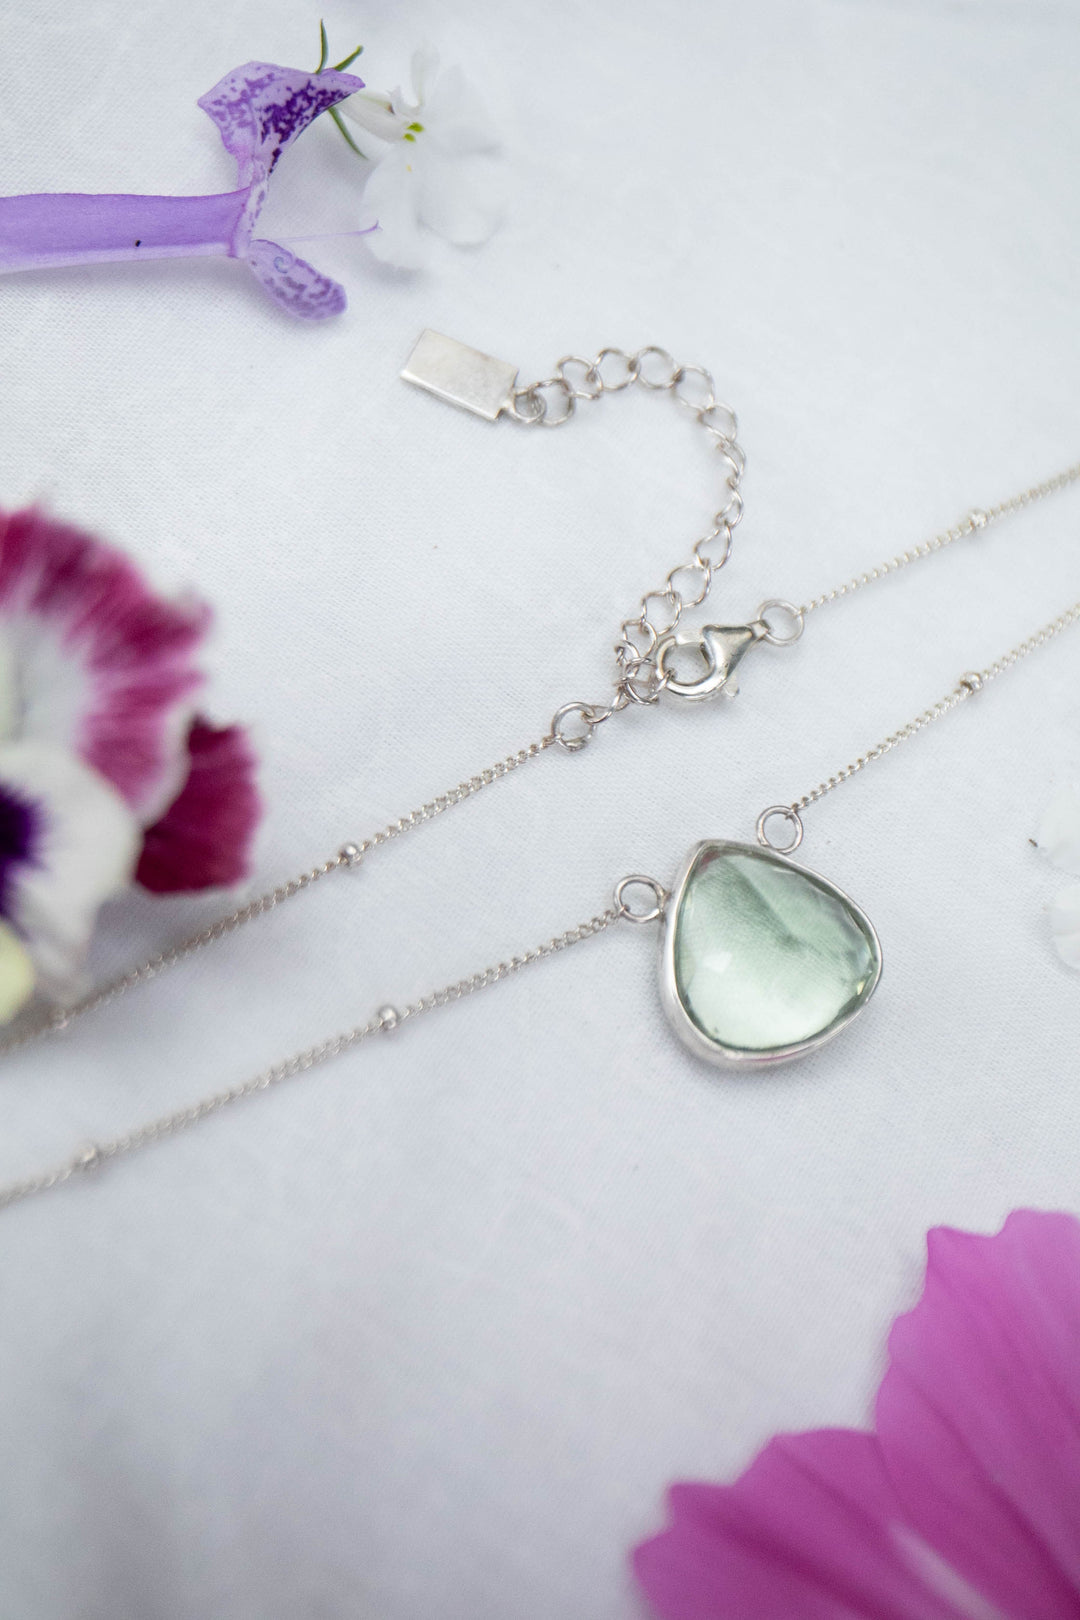 Faceted Green Amethyst or Prasiolite Pendant on Fine Sterling Silver Chain